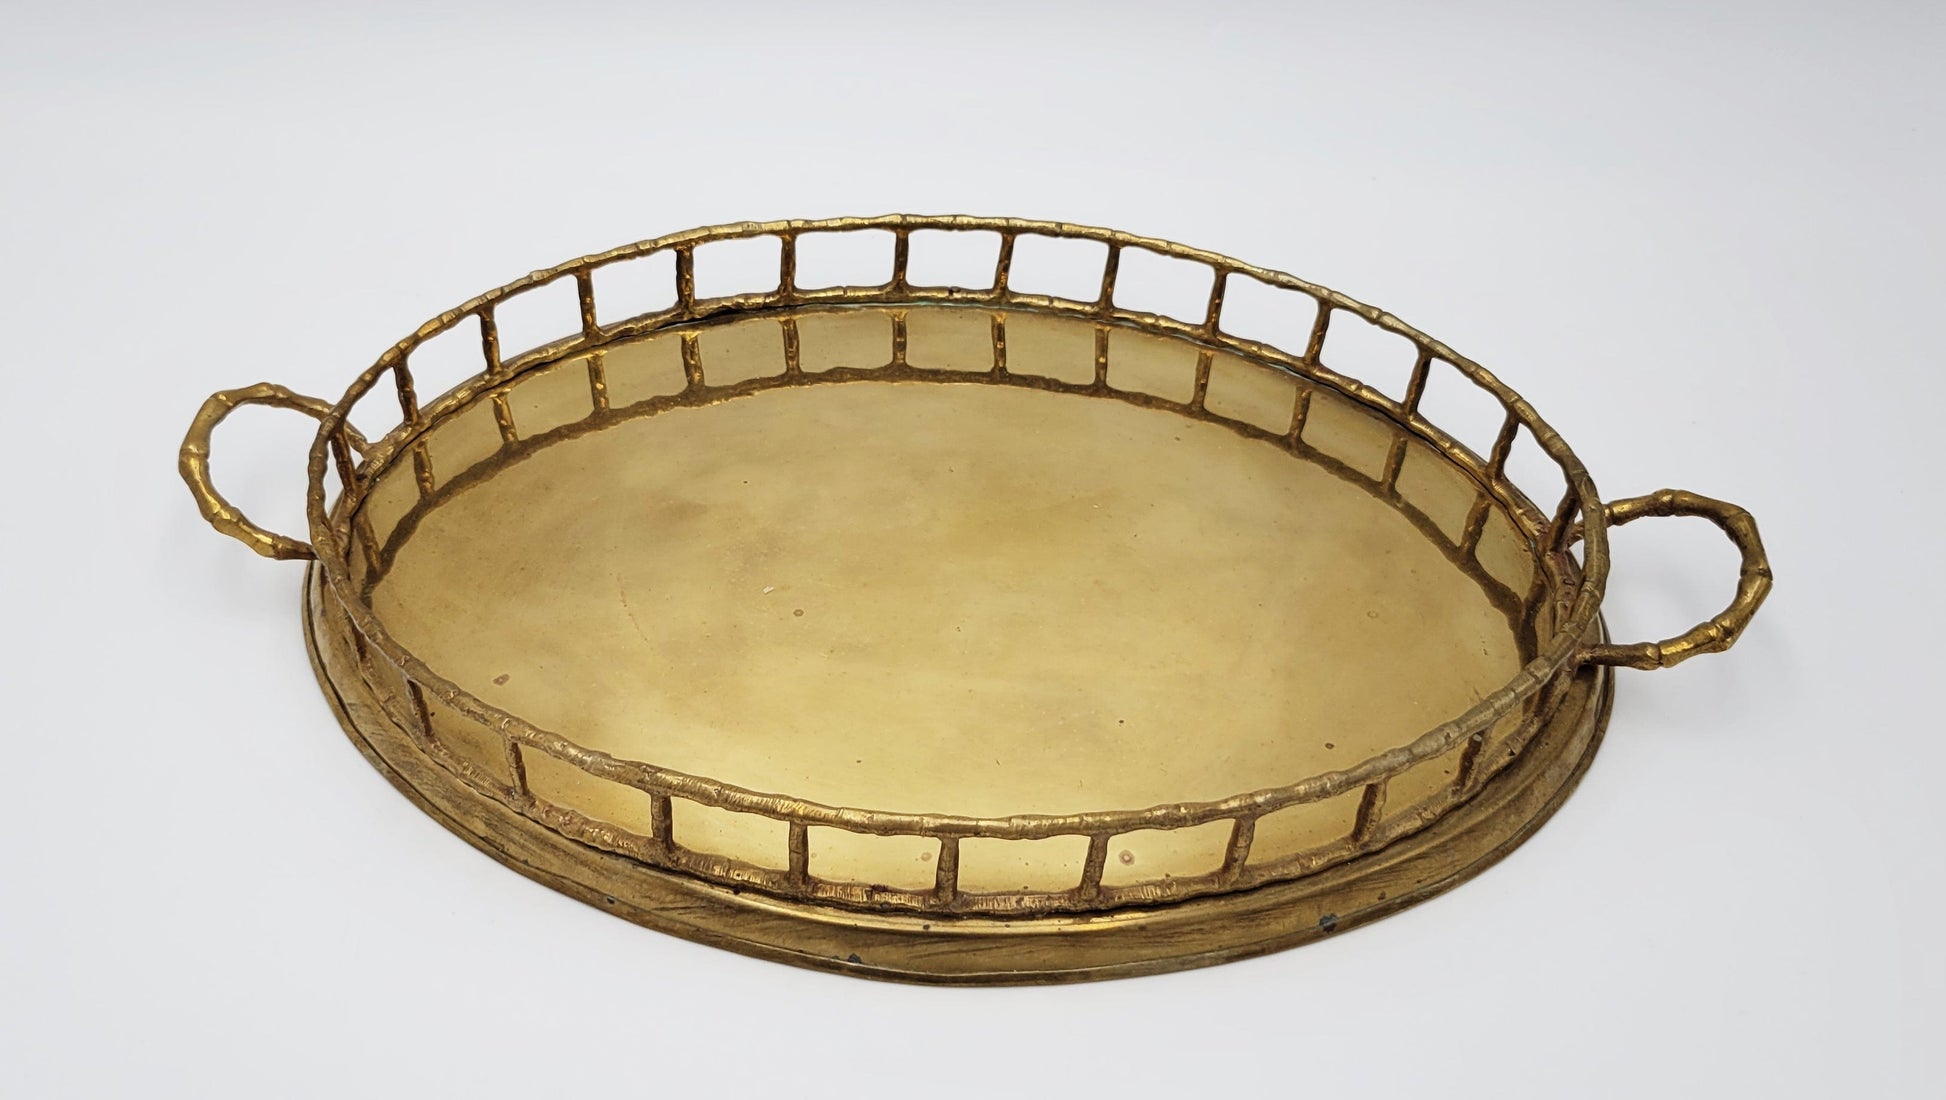 Brass Tray Serveware Vintage Solid Brass Bamboo Style Hollywood Regency Decorative Serving Tray